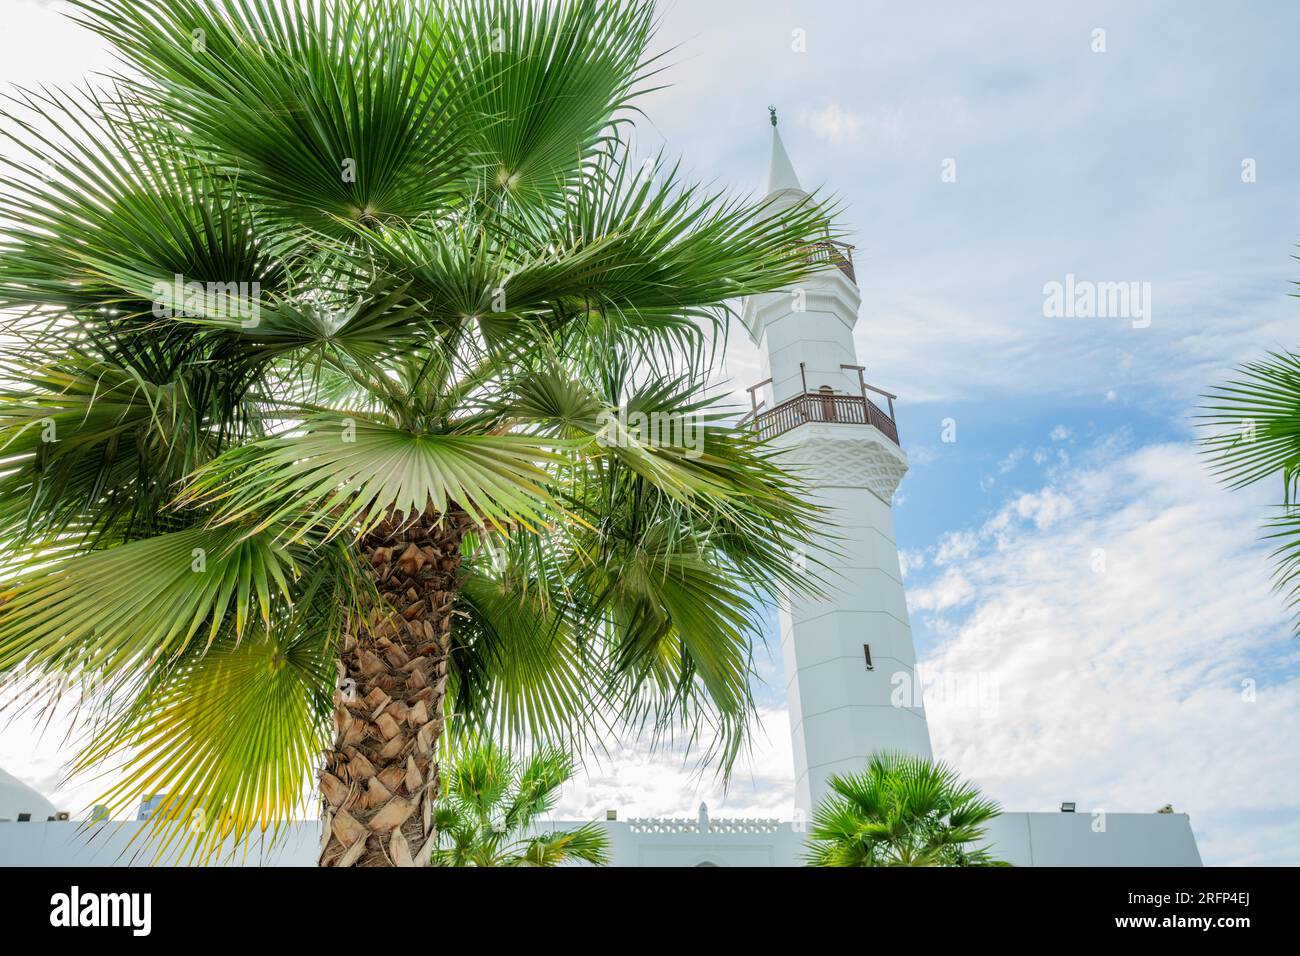 White Jaffali mosque with palms in foreground, Jeddah, Saudi Arabia Stock Photo